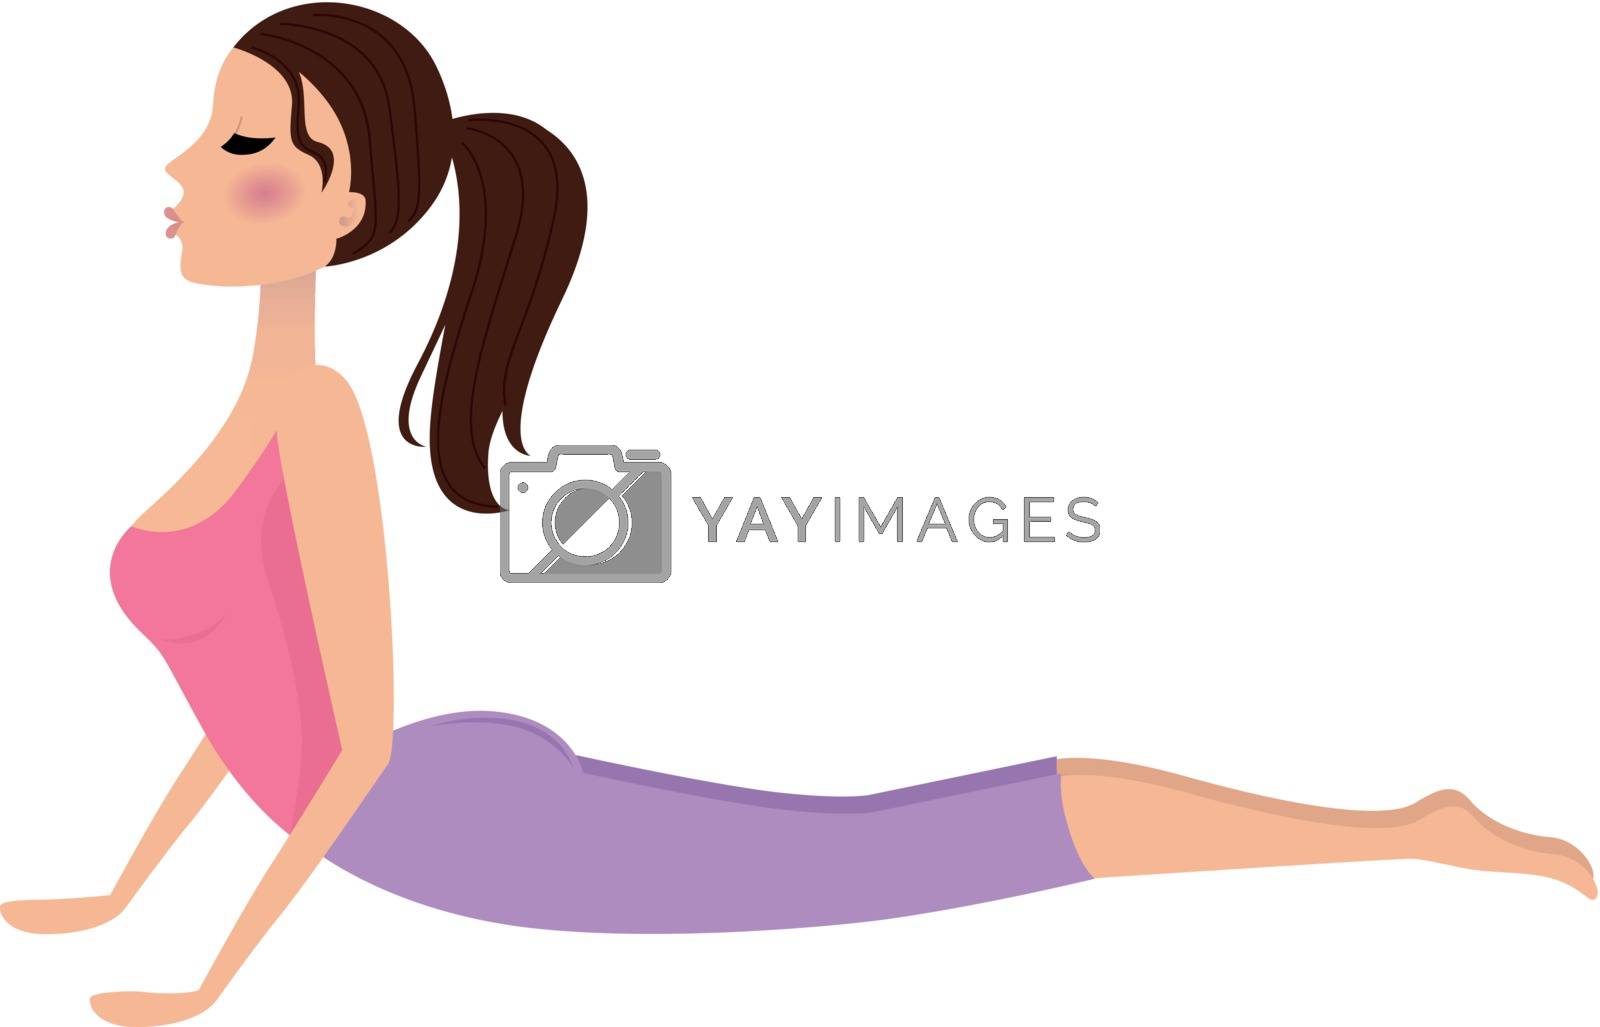 Royalty free image of Young girl doing yoga exercise isolated on white by Lordalea